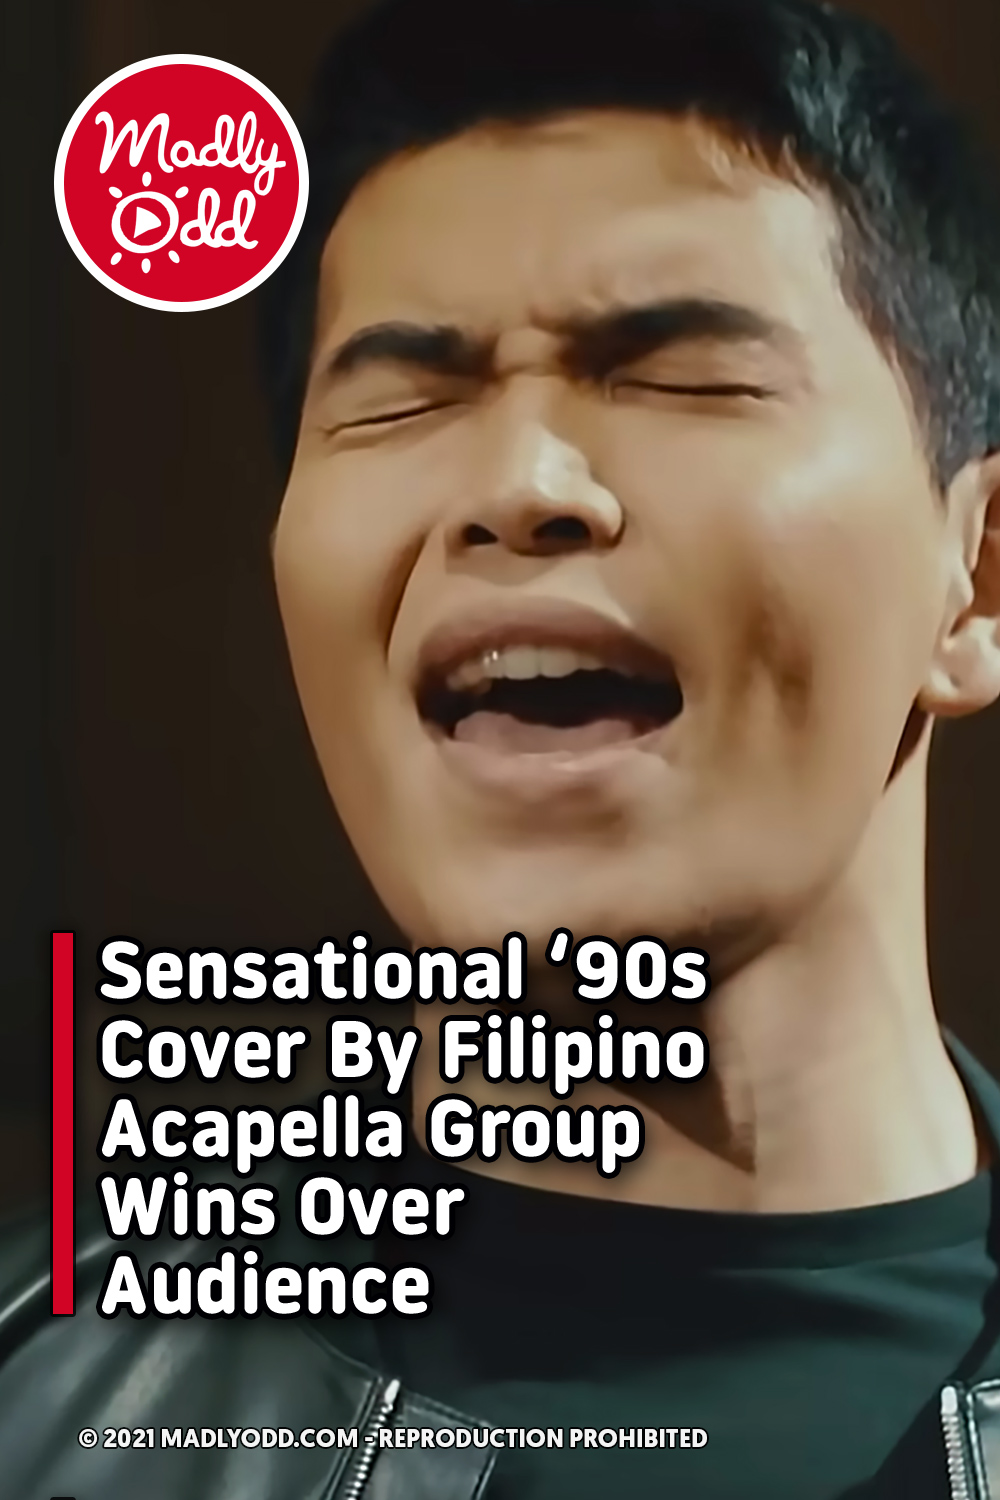 Sensational ‘90s Cover By Filipino Acapella Group Wins Over Audience